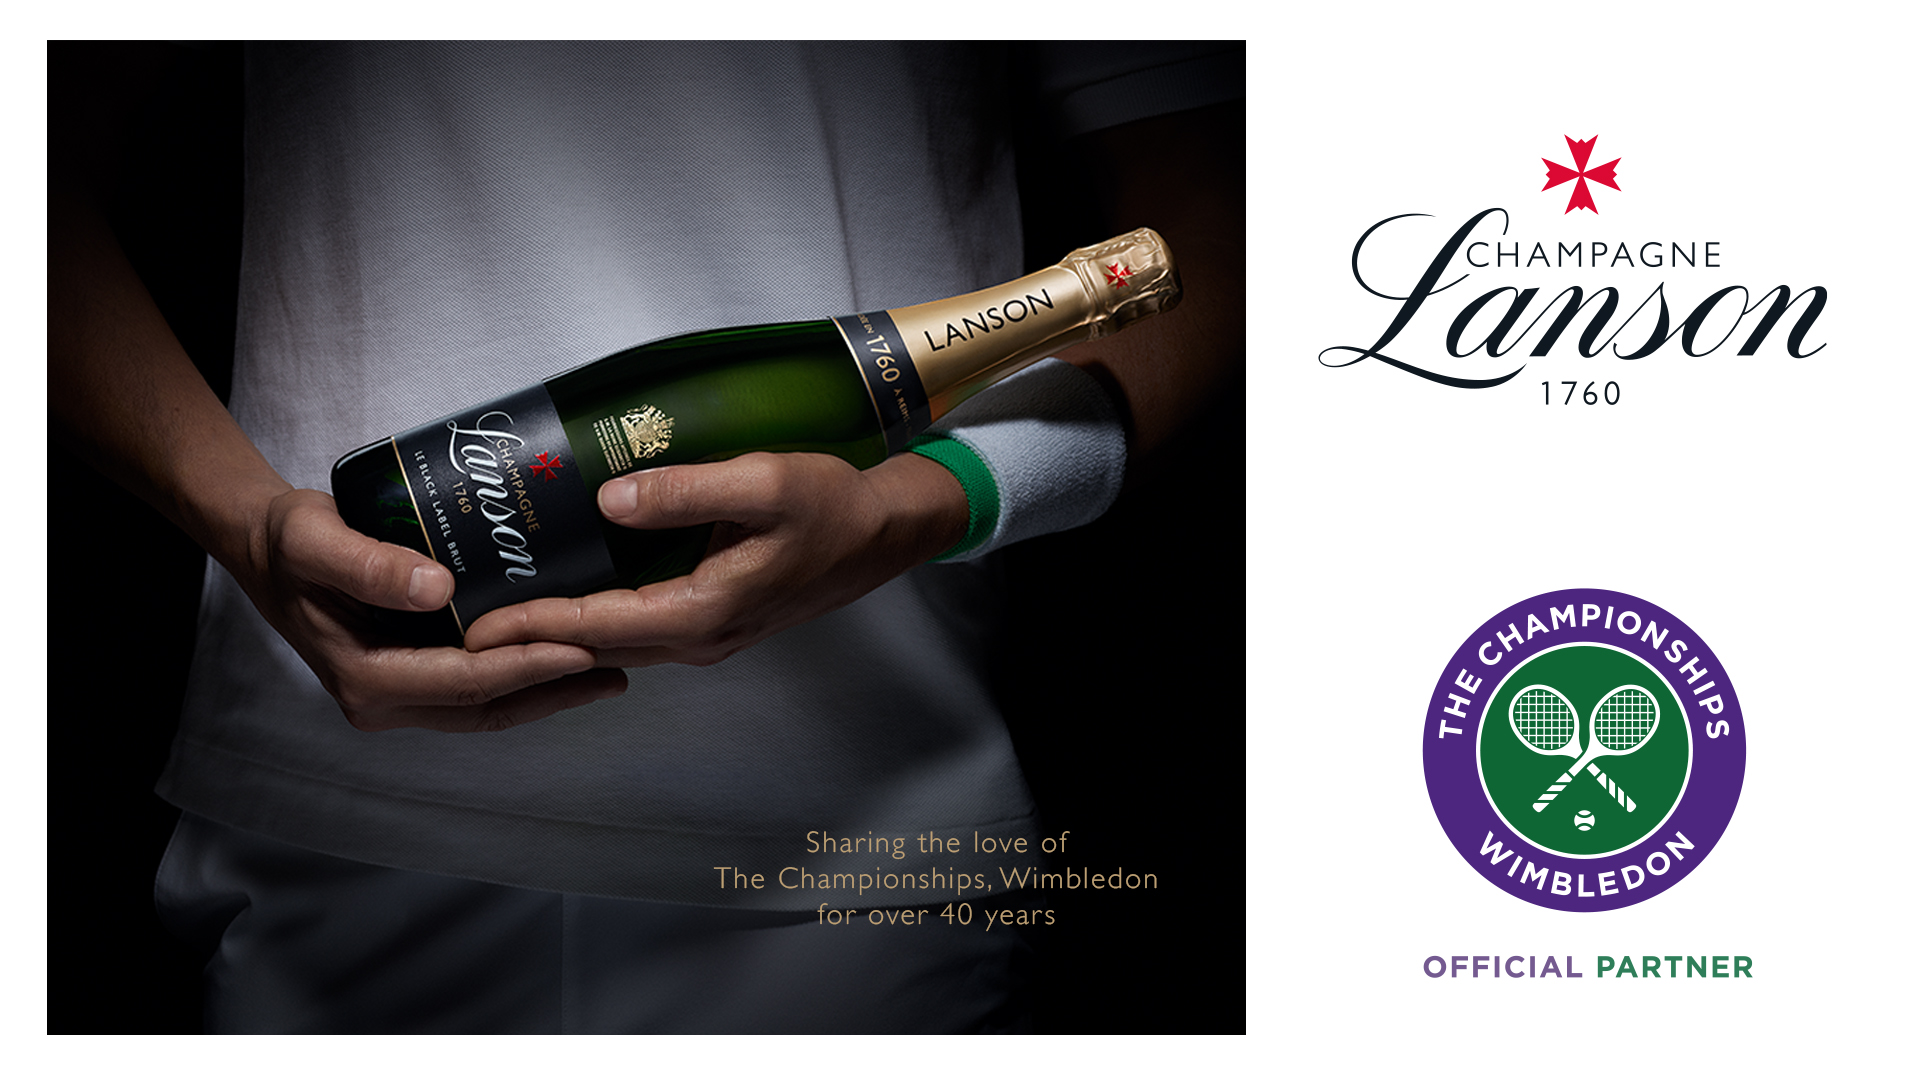 Win big for Wimbledon with Champagne Lanson!